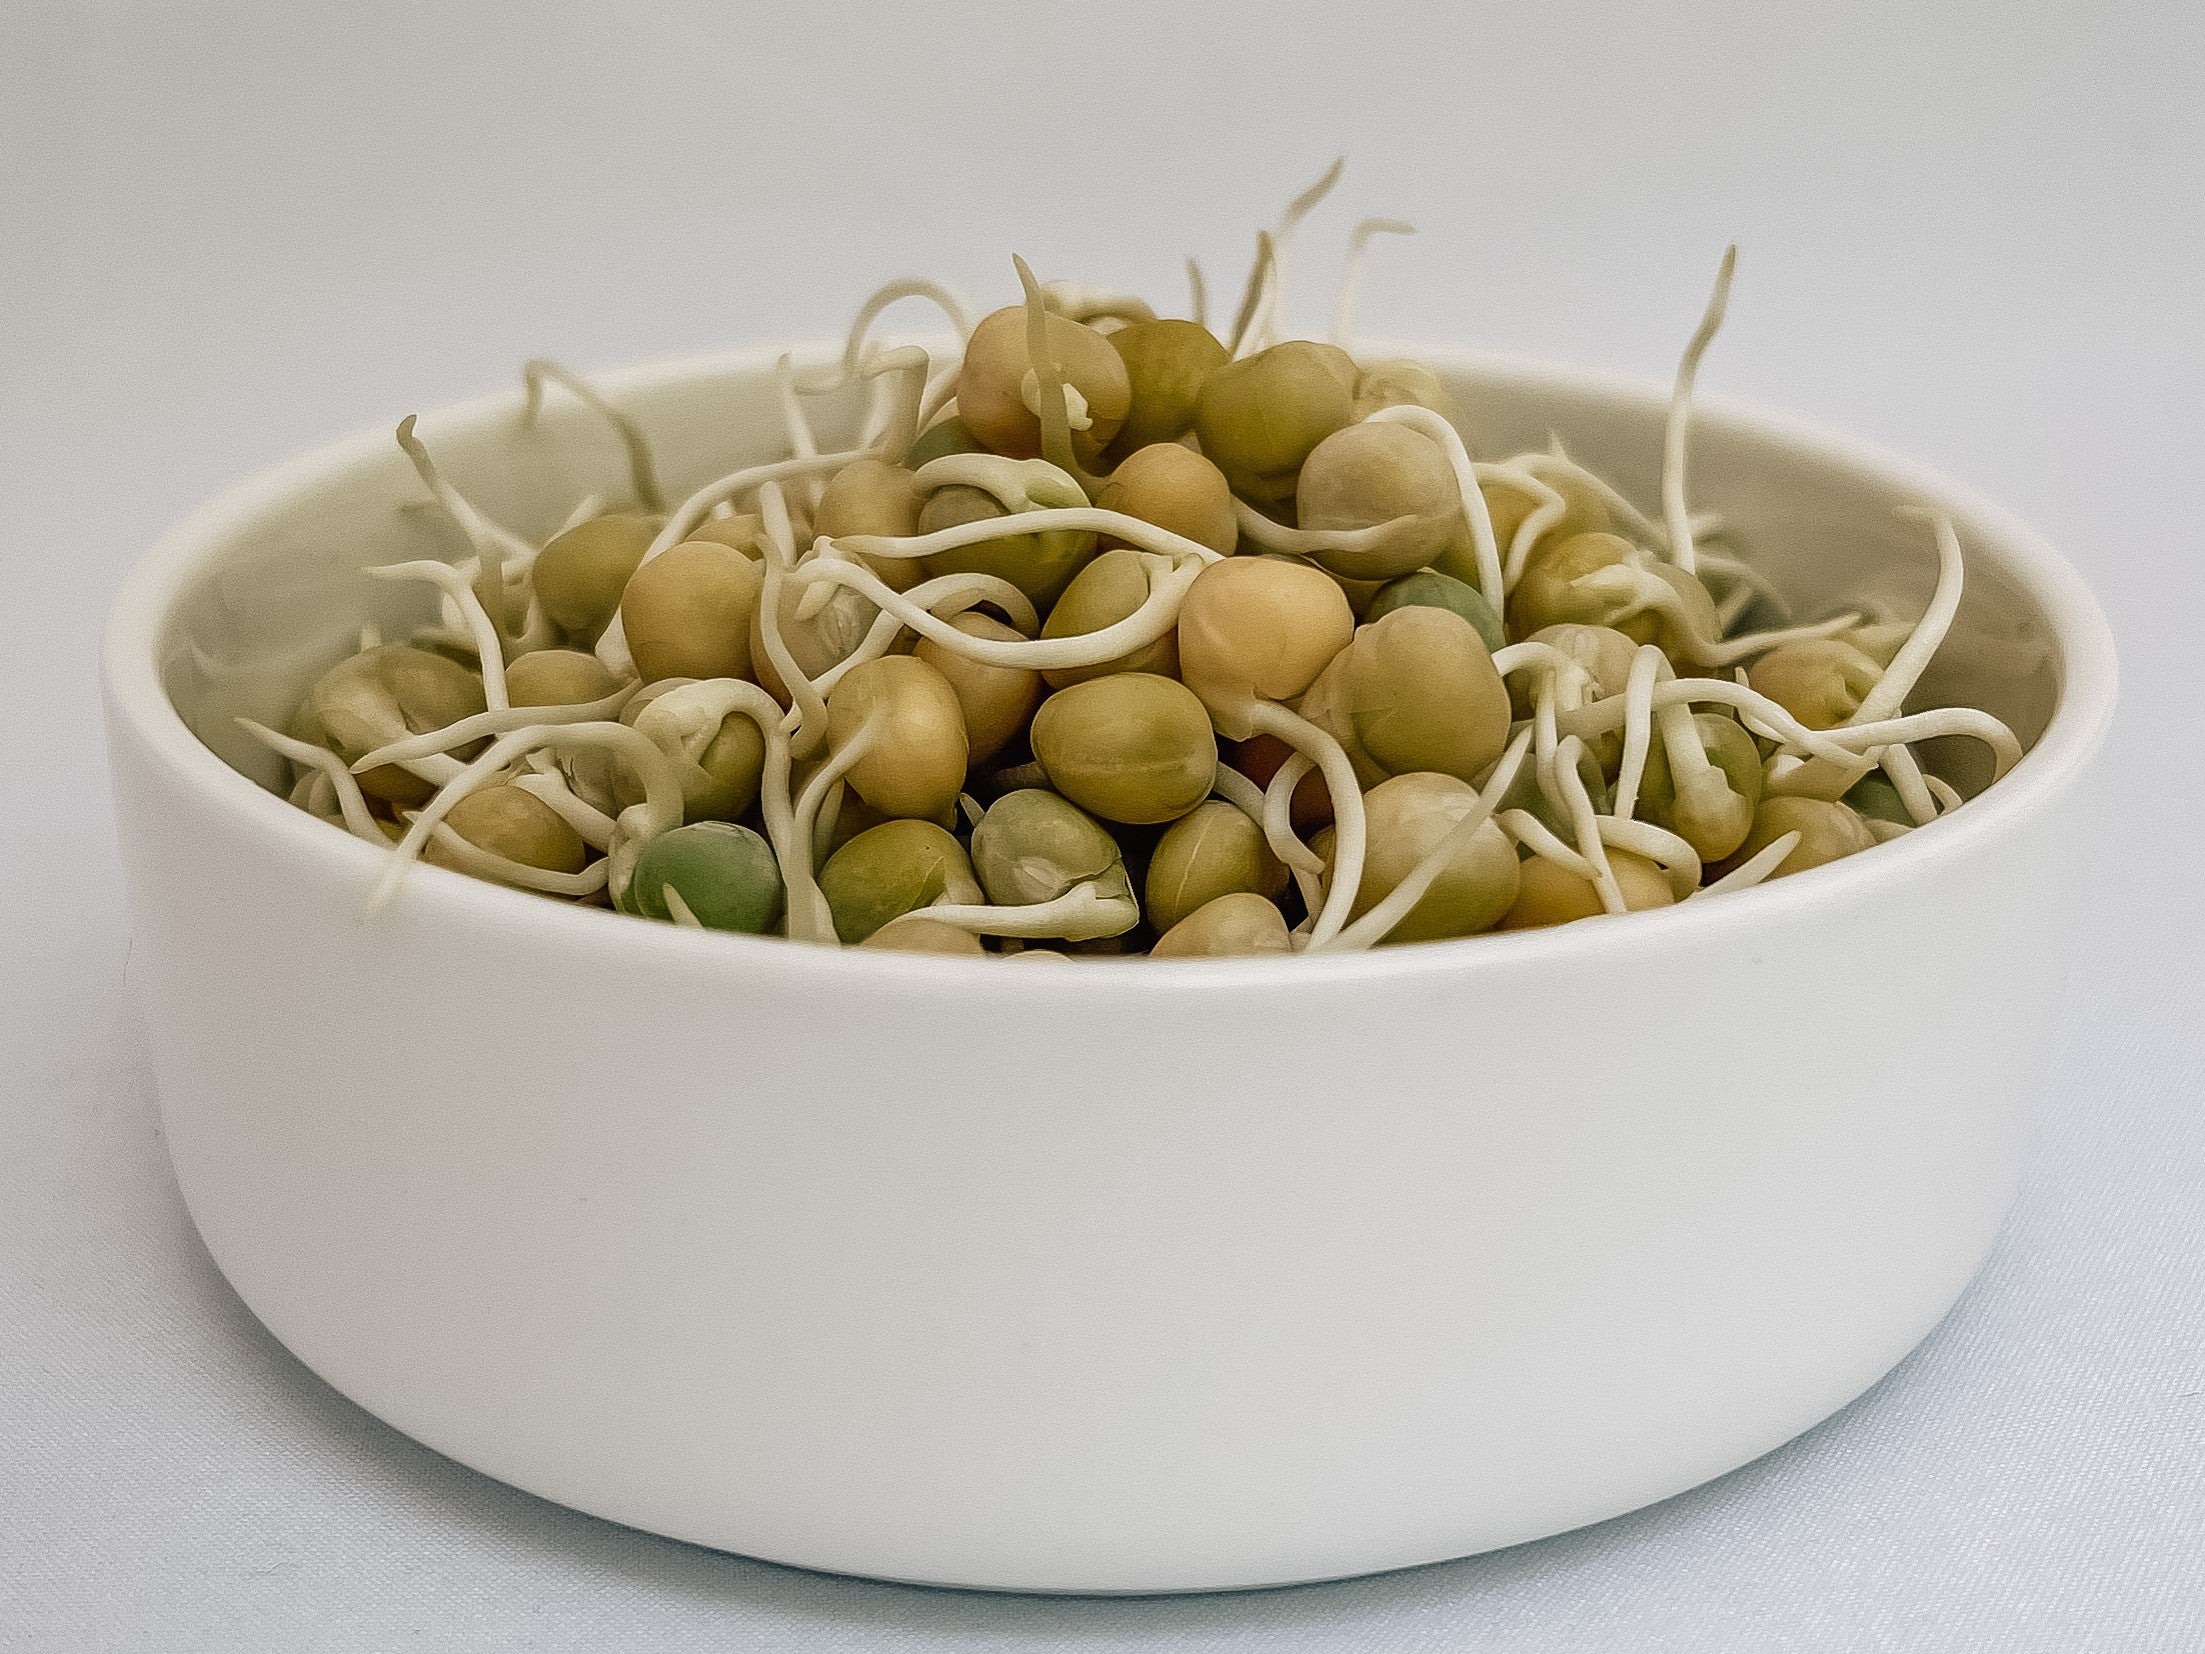 Green Pea sprouts in a bowl